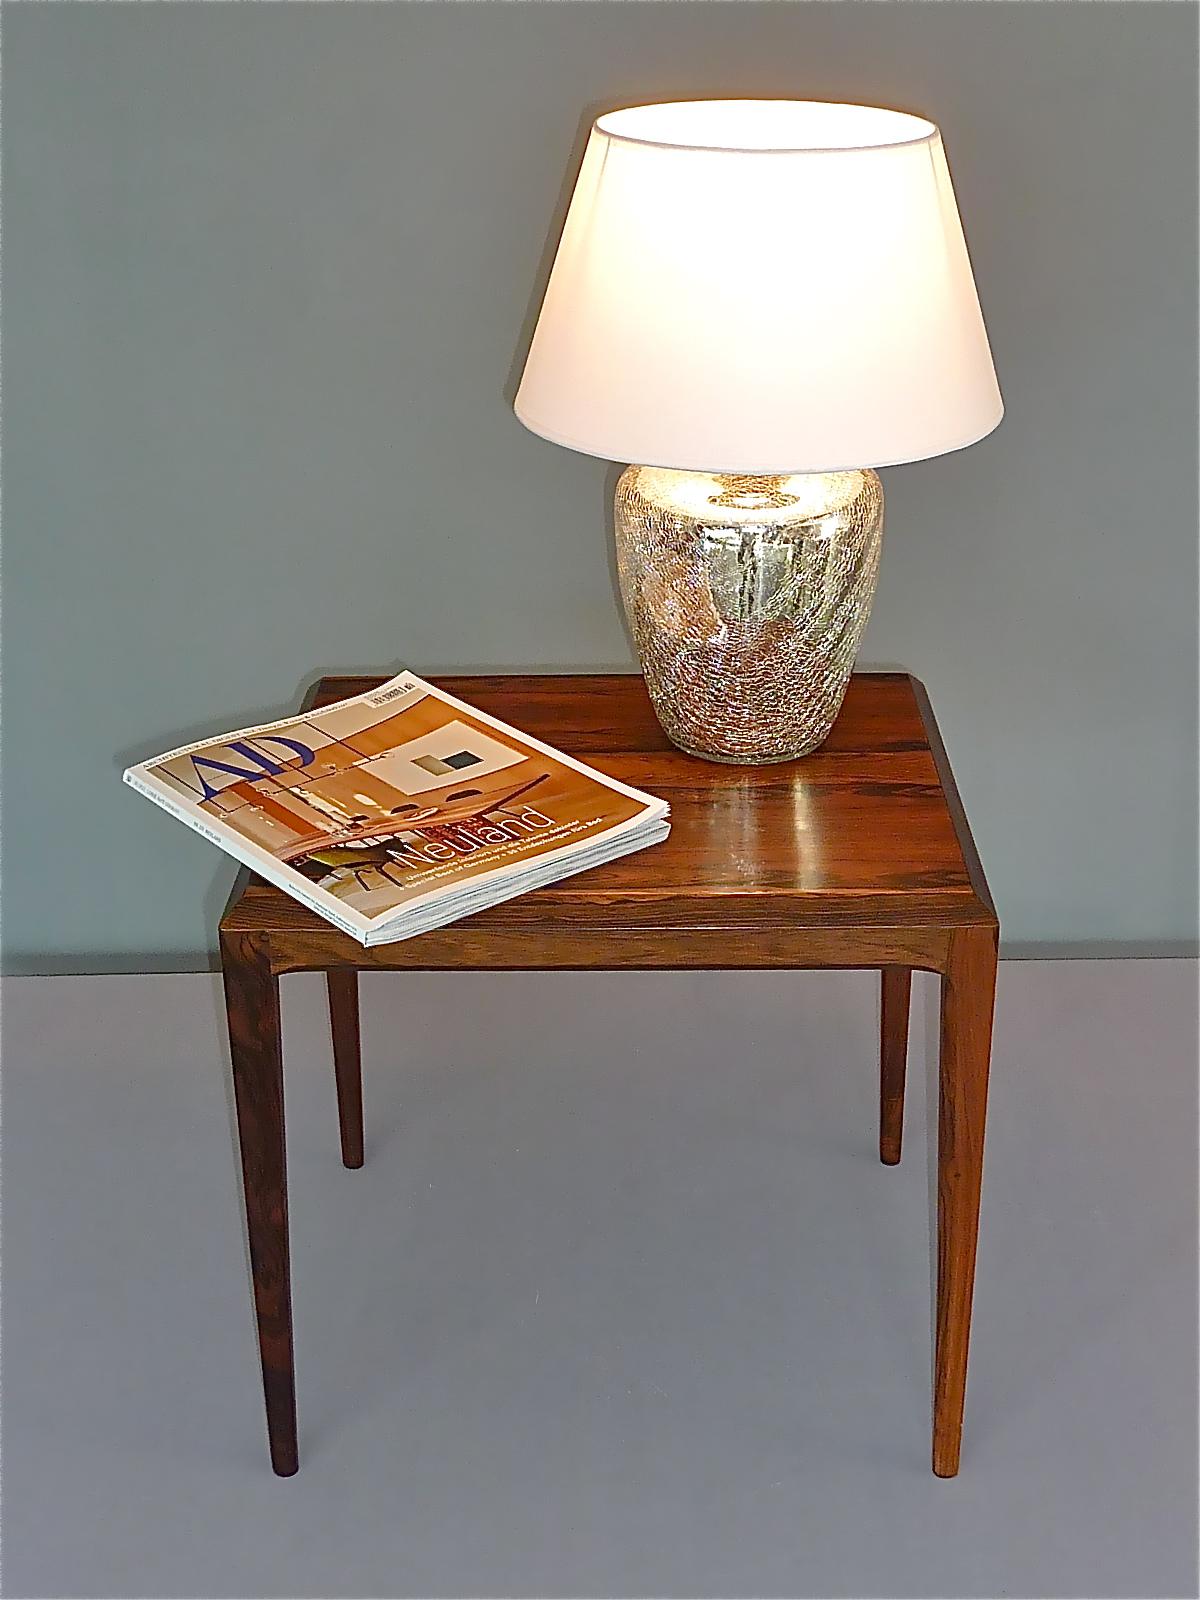 crackled glass table lamp